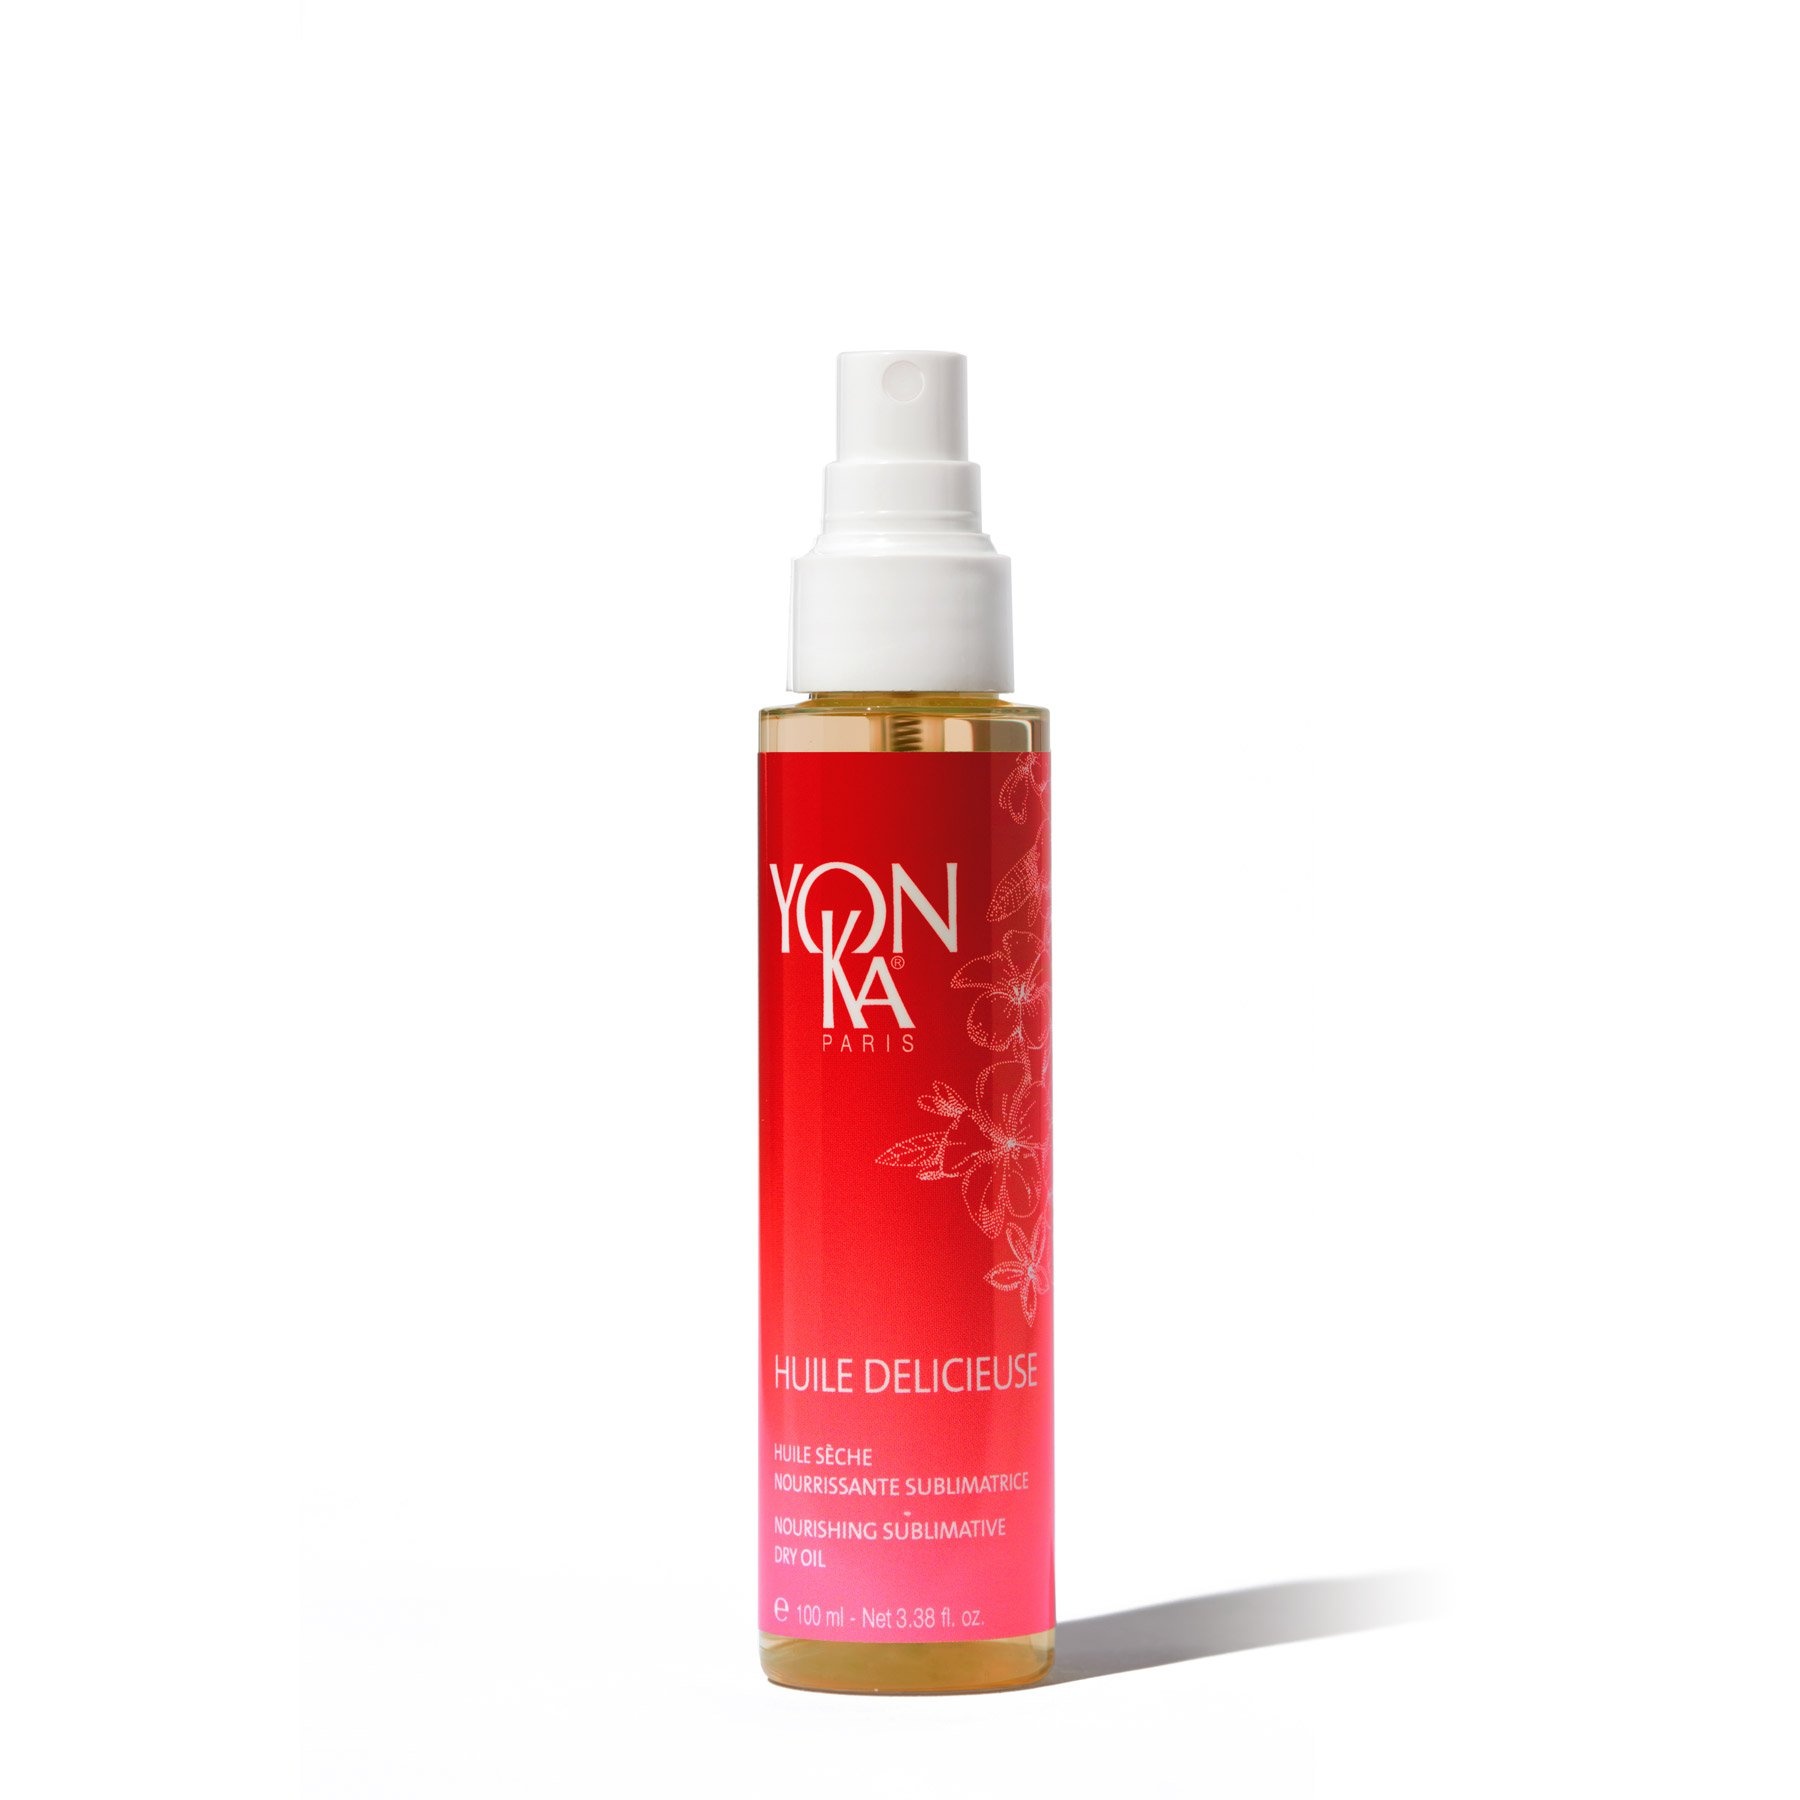 Yonka Huile Delicieuse Nourising Sublimative Dry Oil